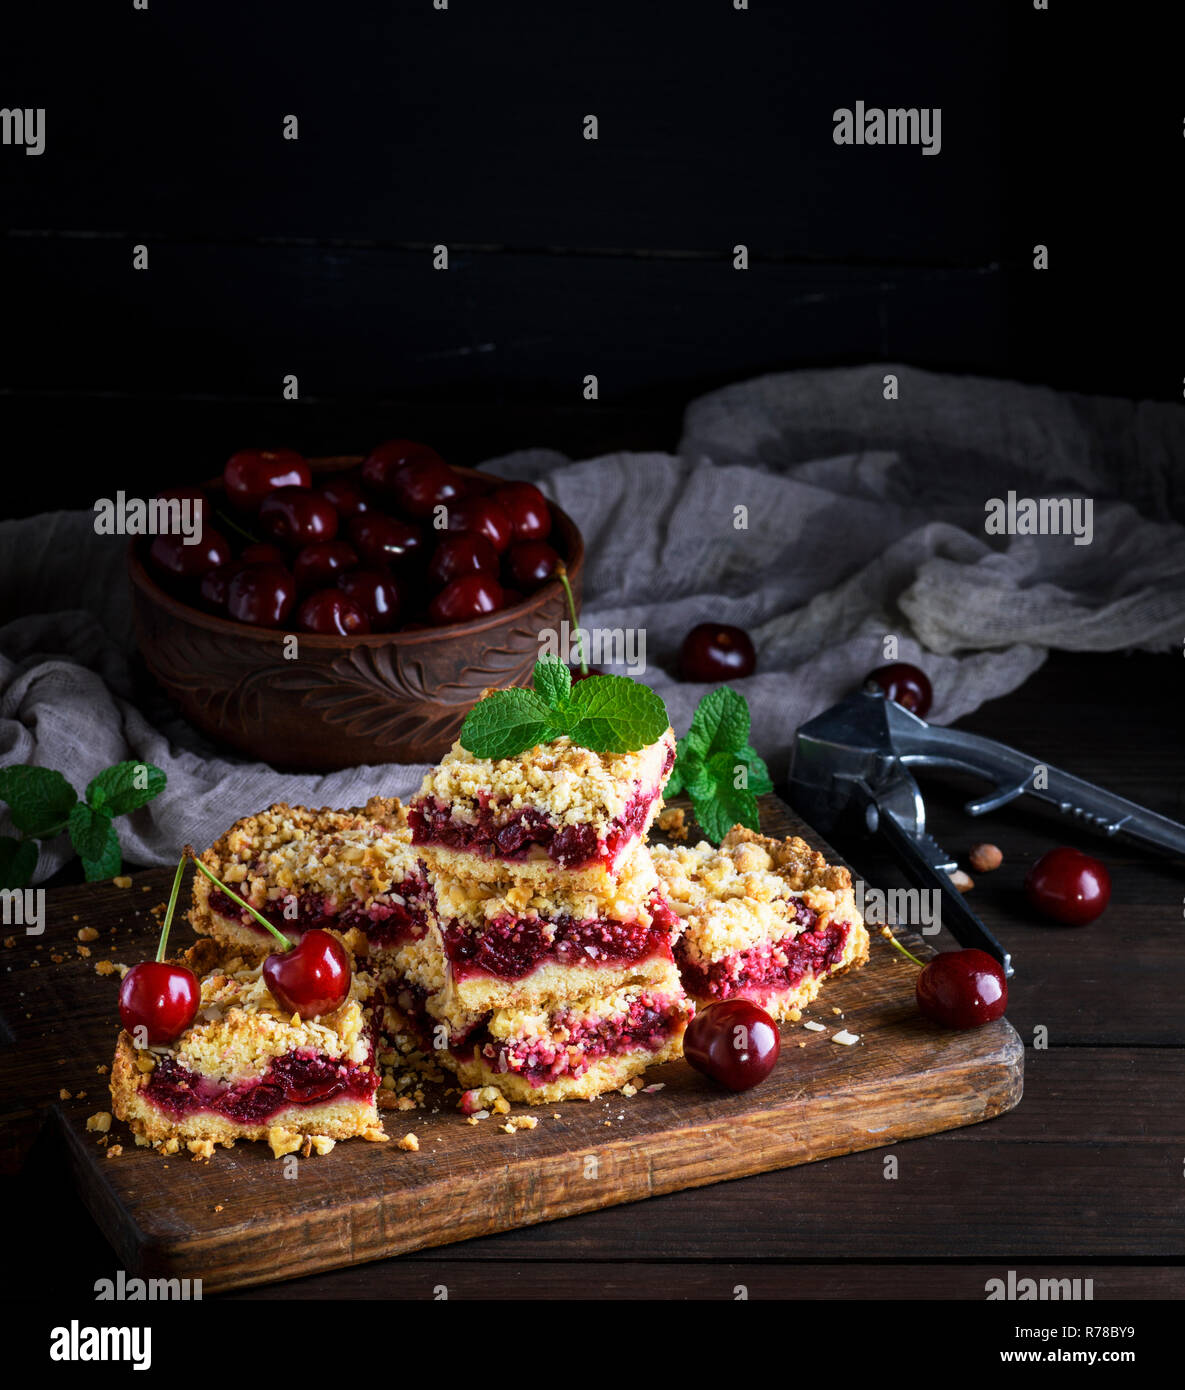 baked cake with cherry and ceramic bowl with fresh berries Stock Photo